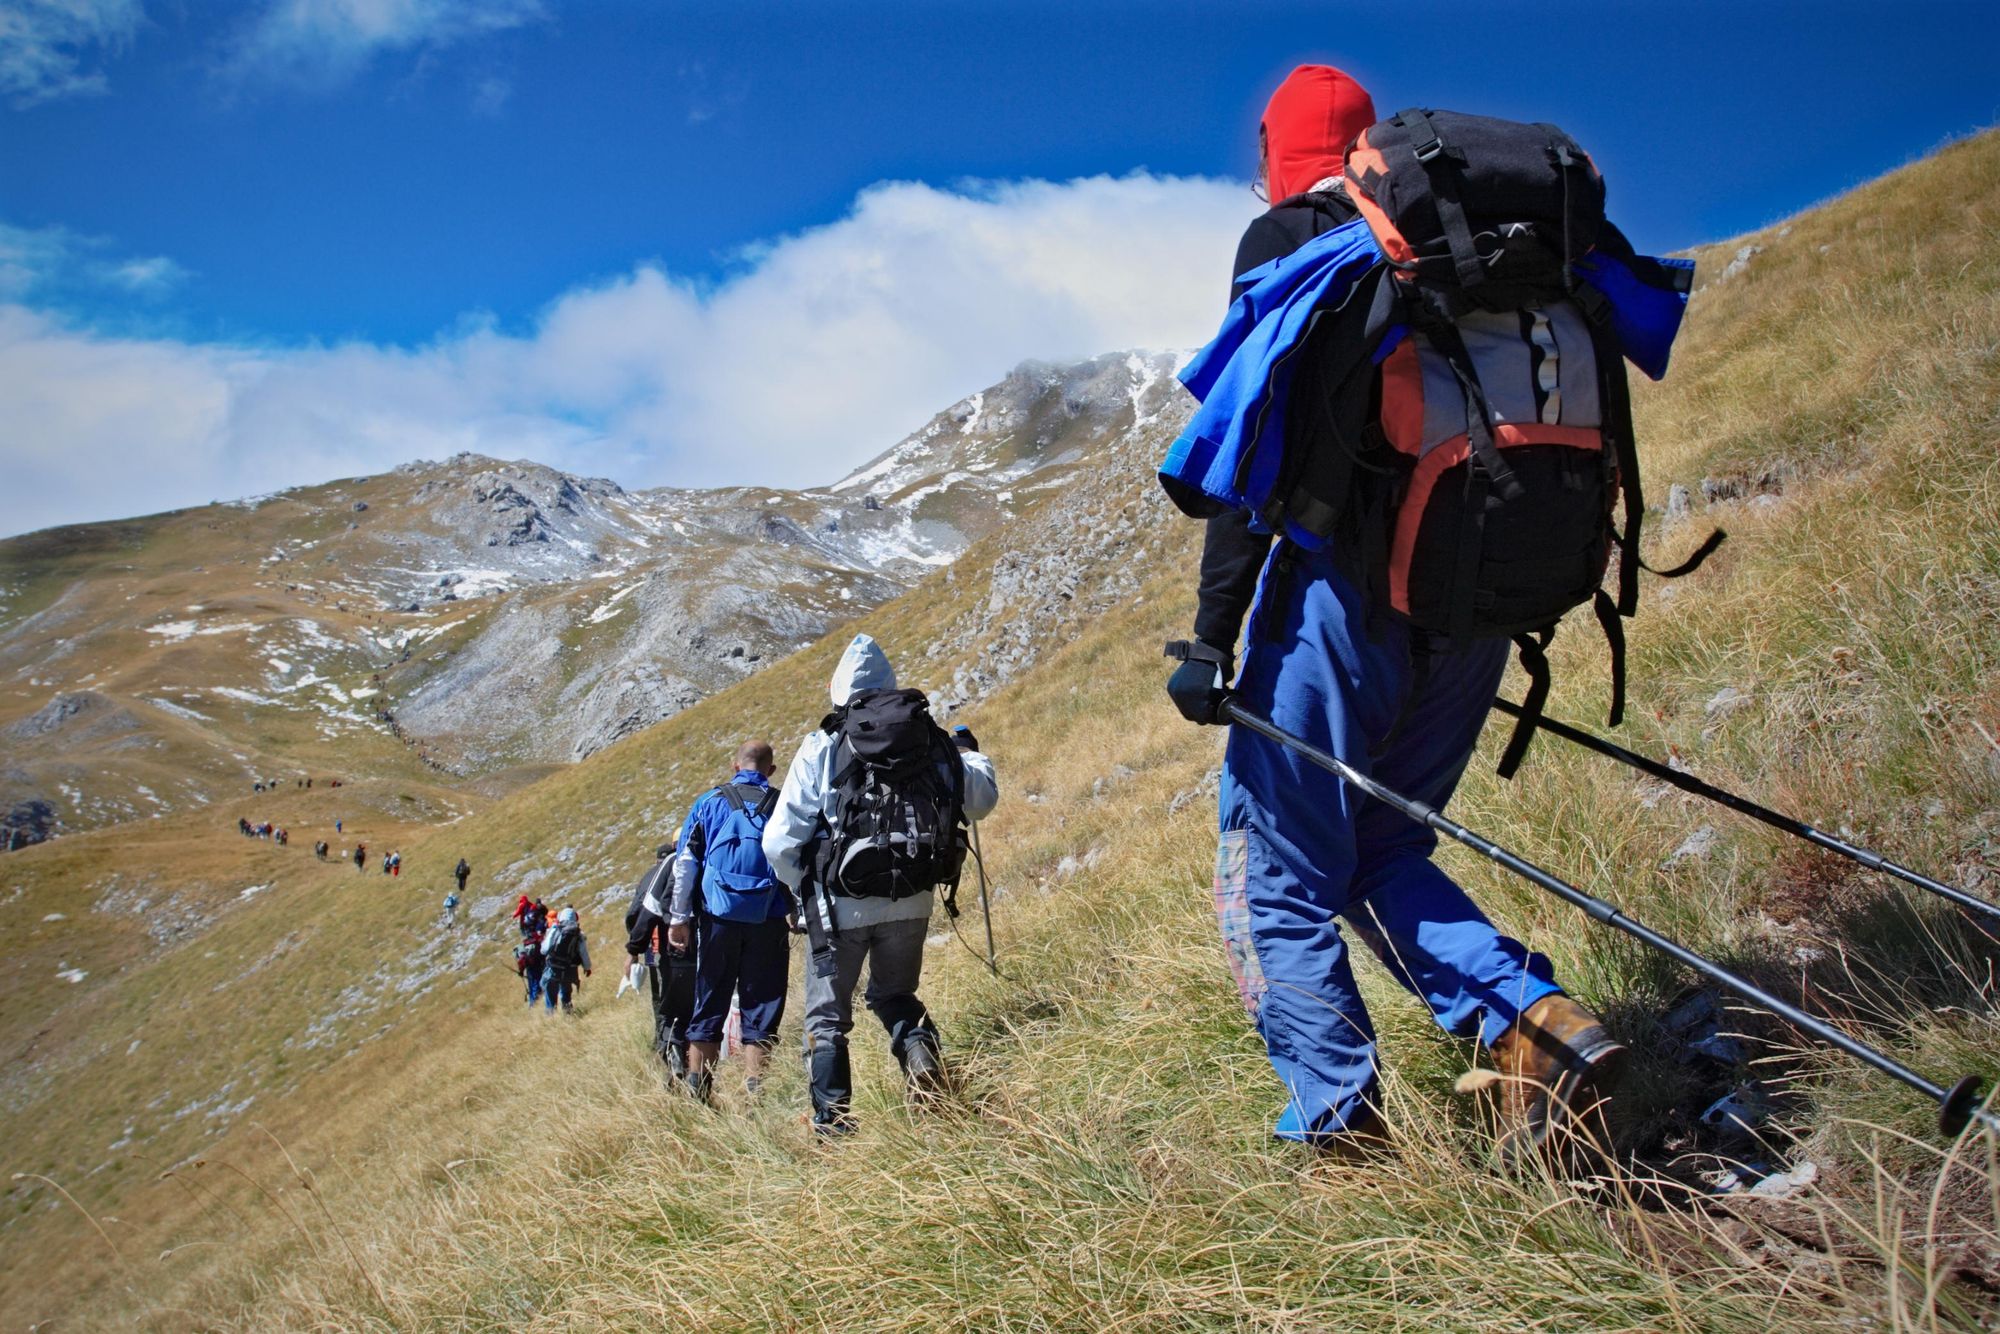 A group hikers head towards Mount Korab, which is the high point of both Albania and North Macedonia. Photo: Getty